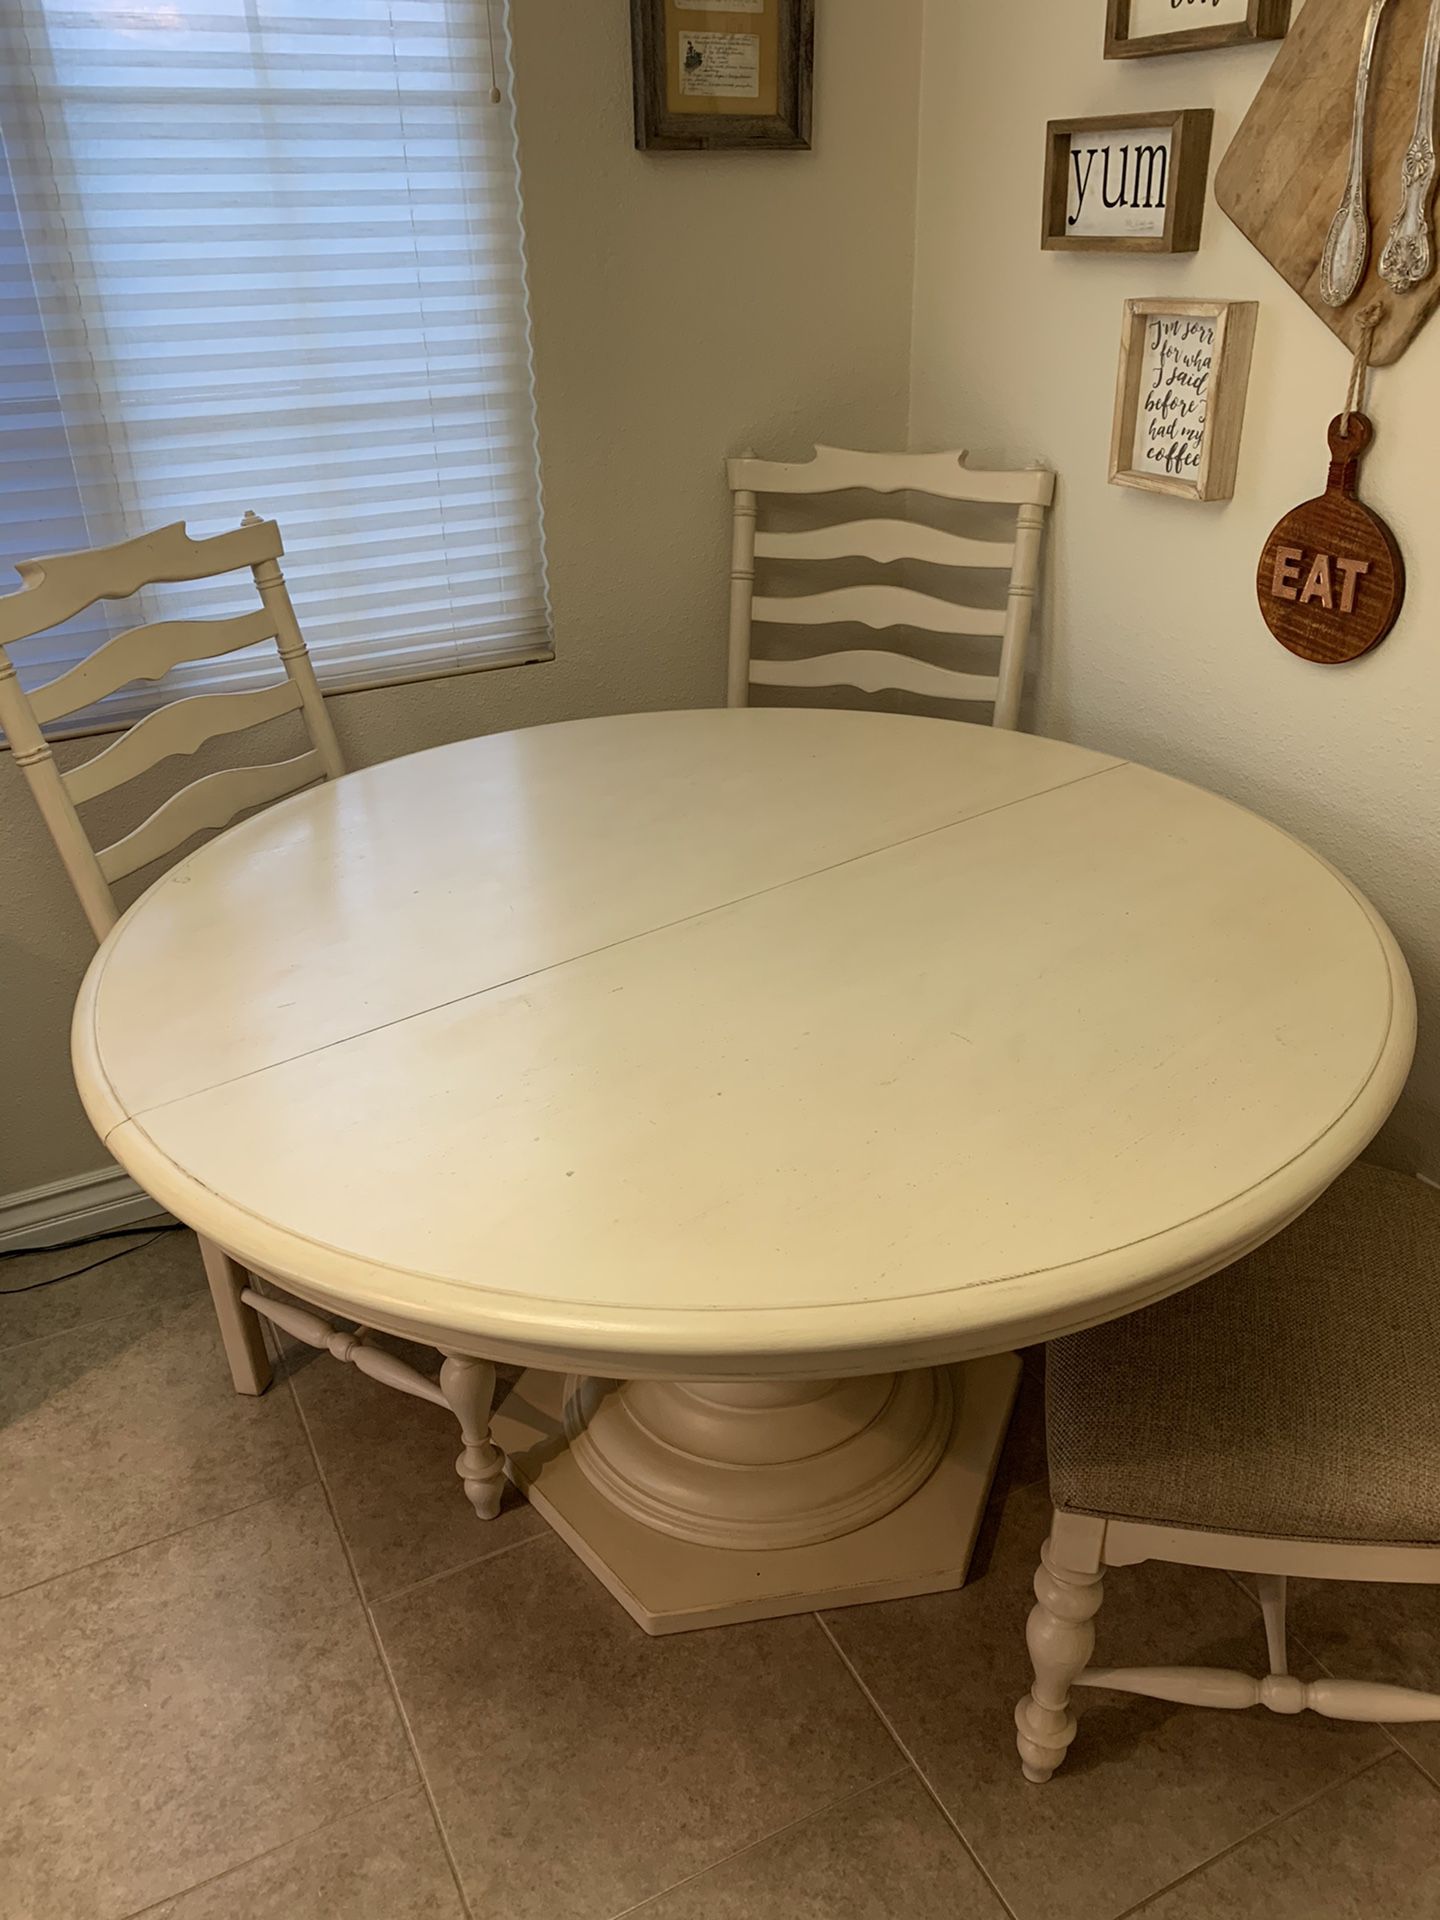 Cream antiqued kitchen table, seats 4-6